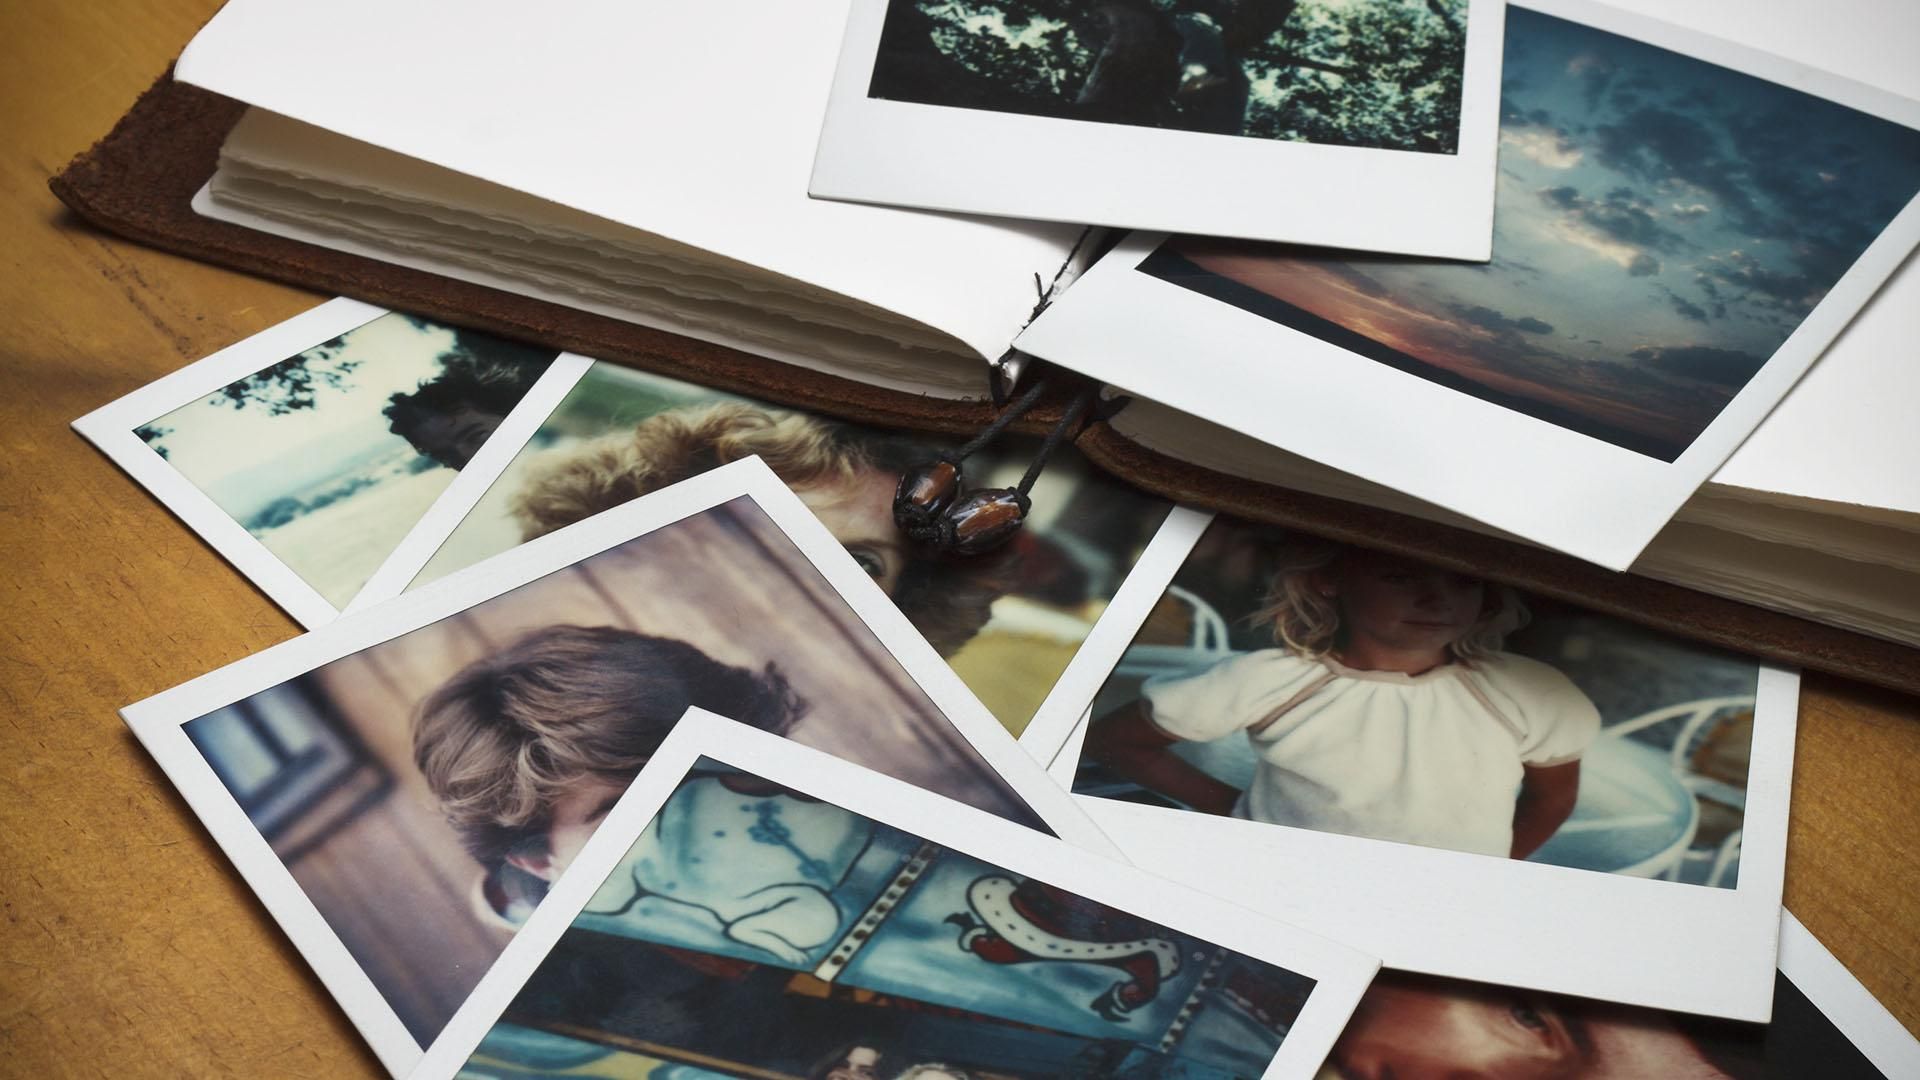 How to make a photo book from scratch